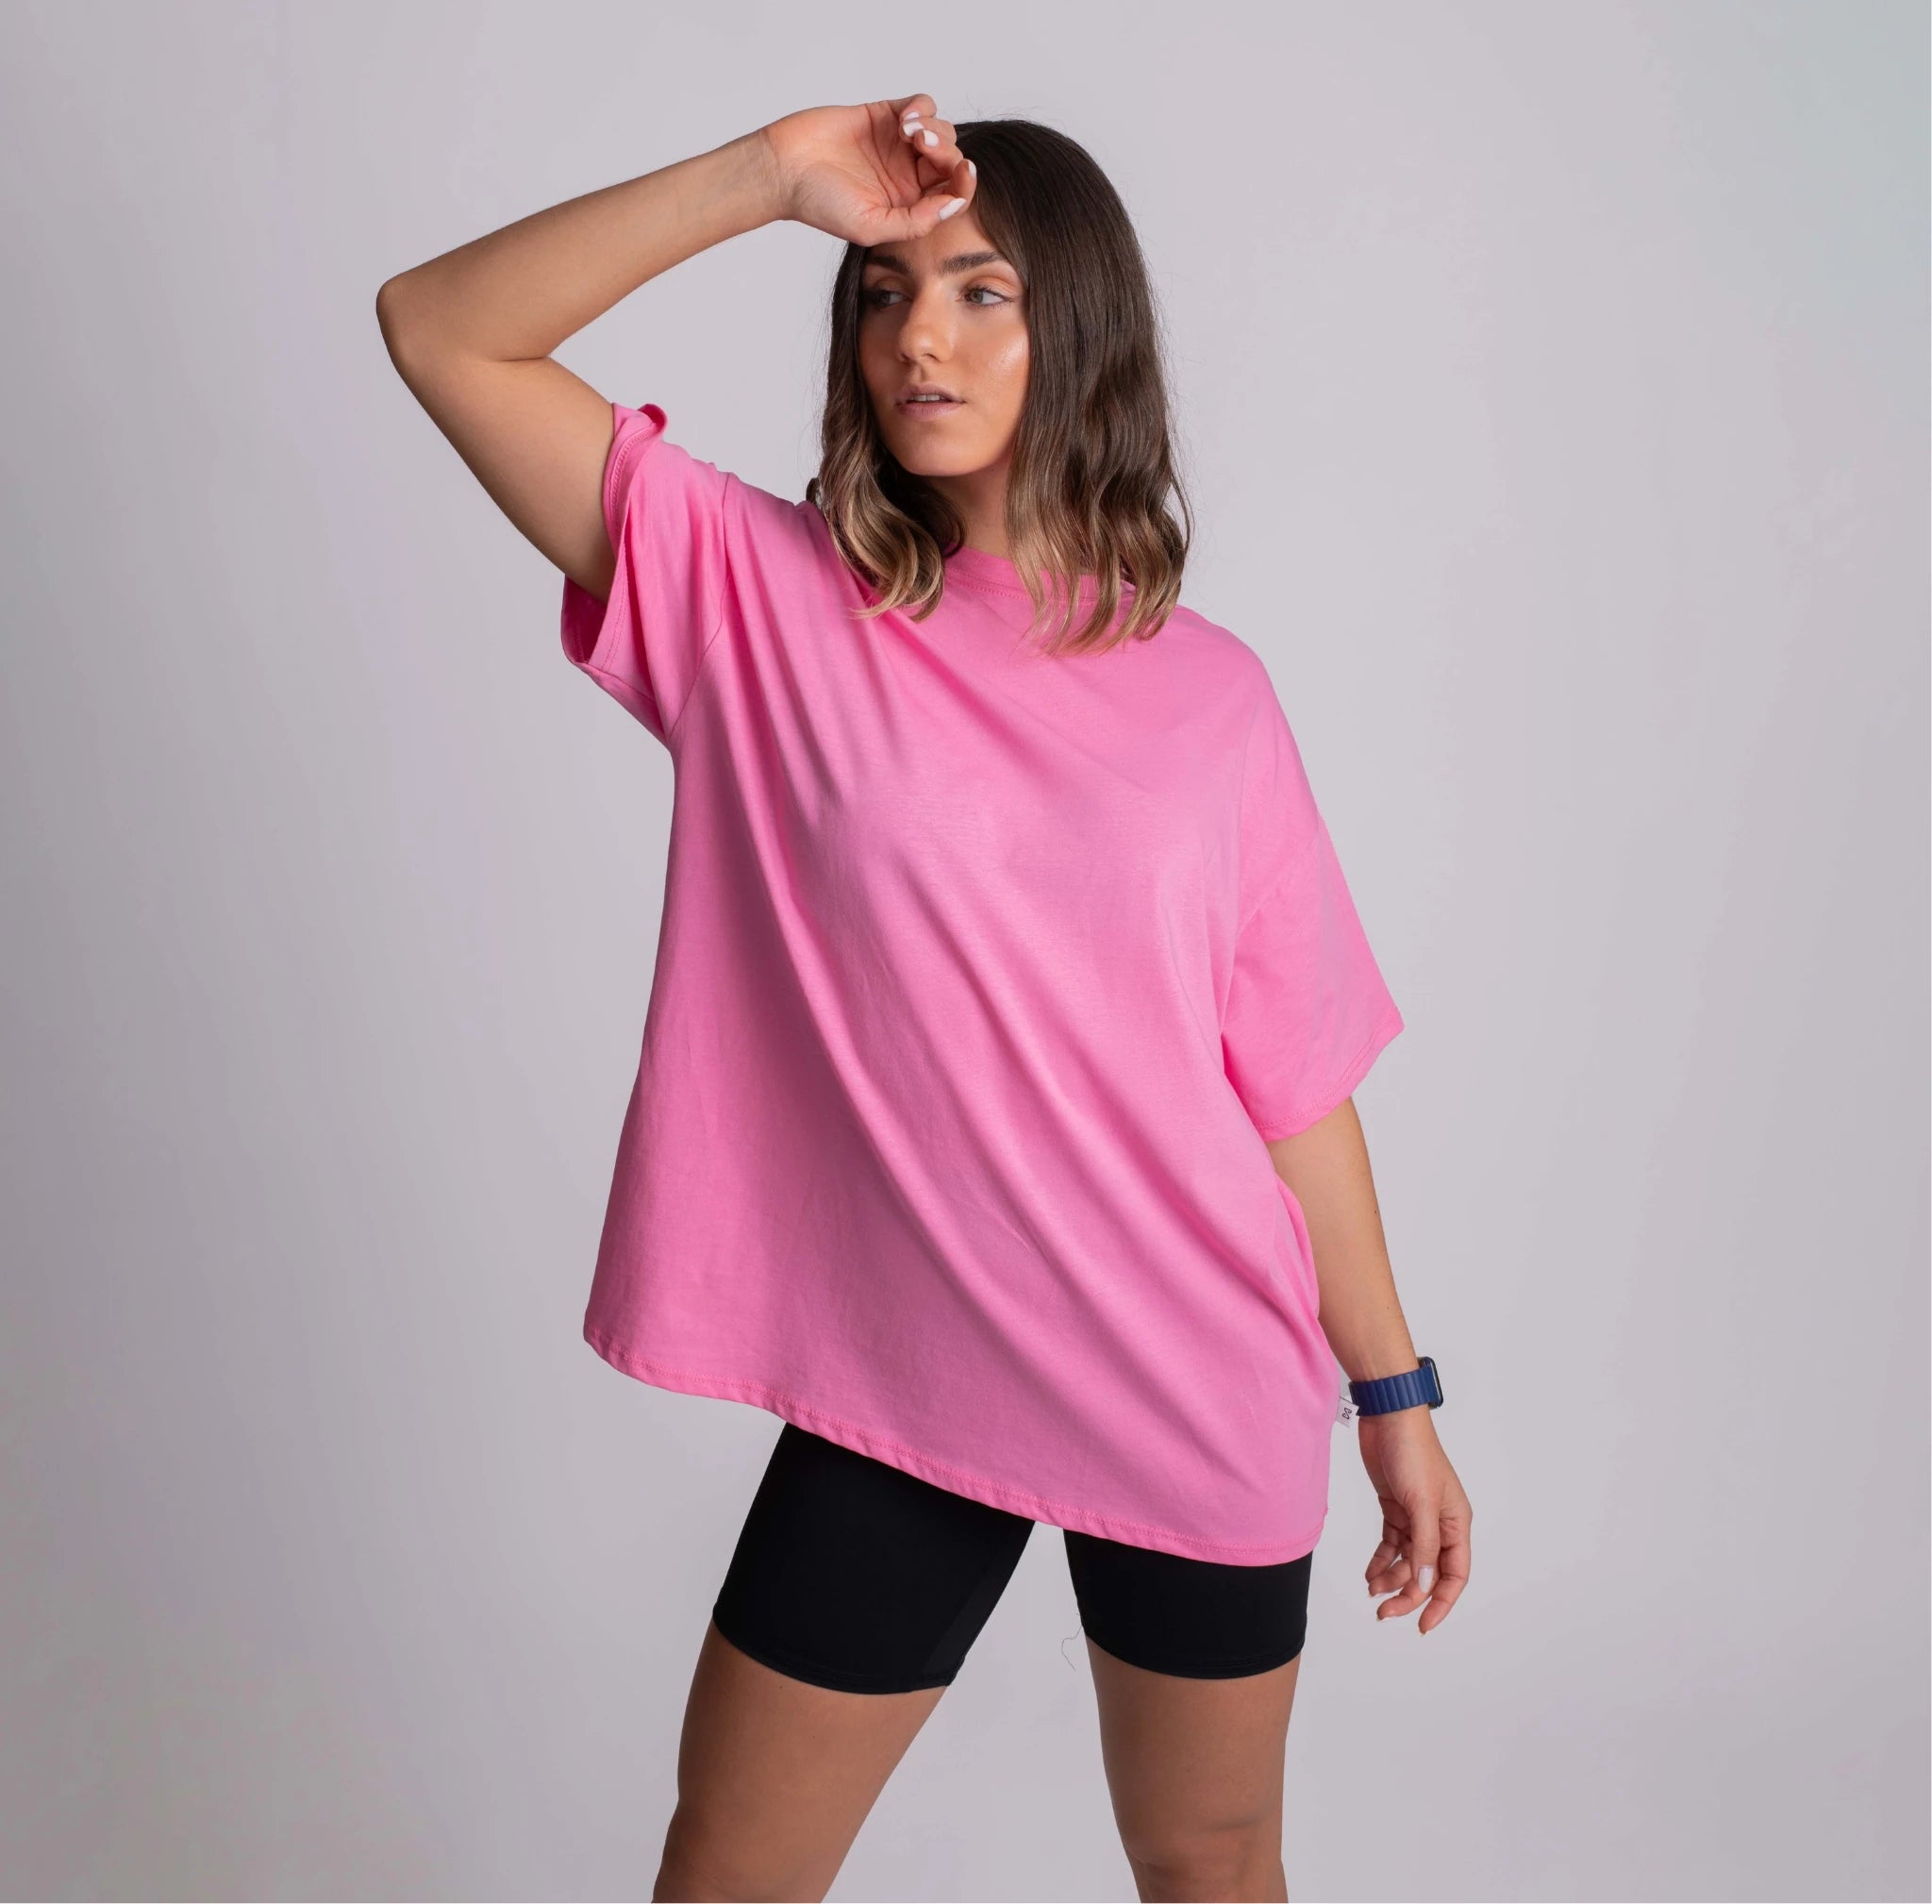 T-shirt Oversize rosa Love yourself